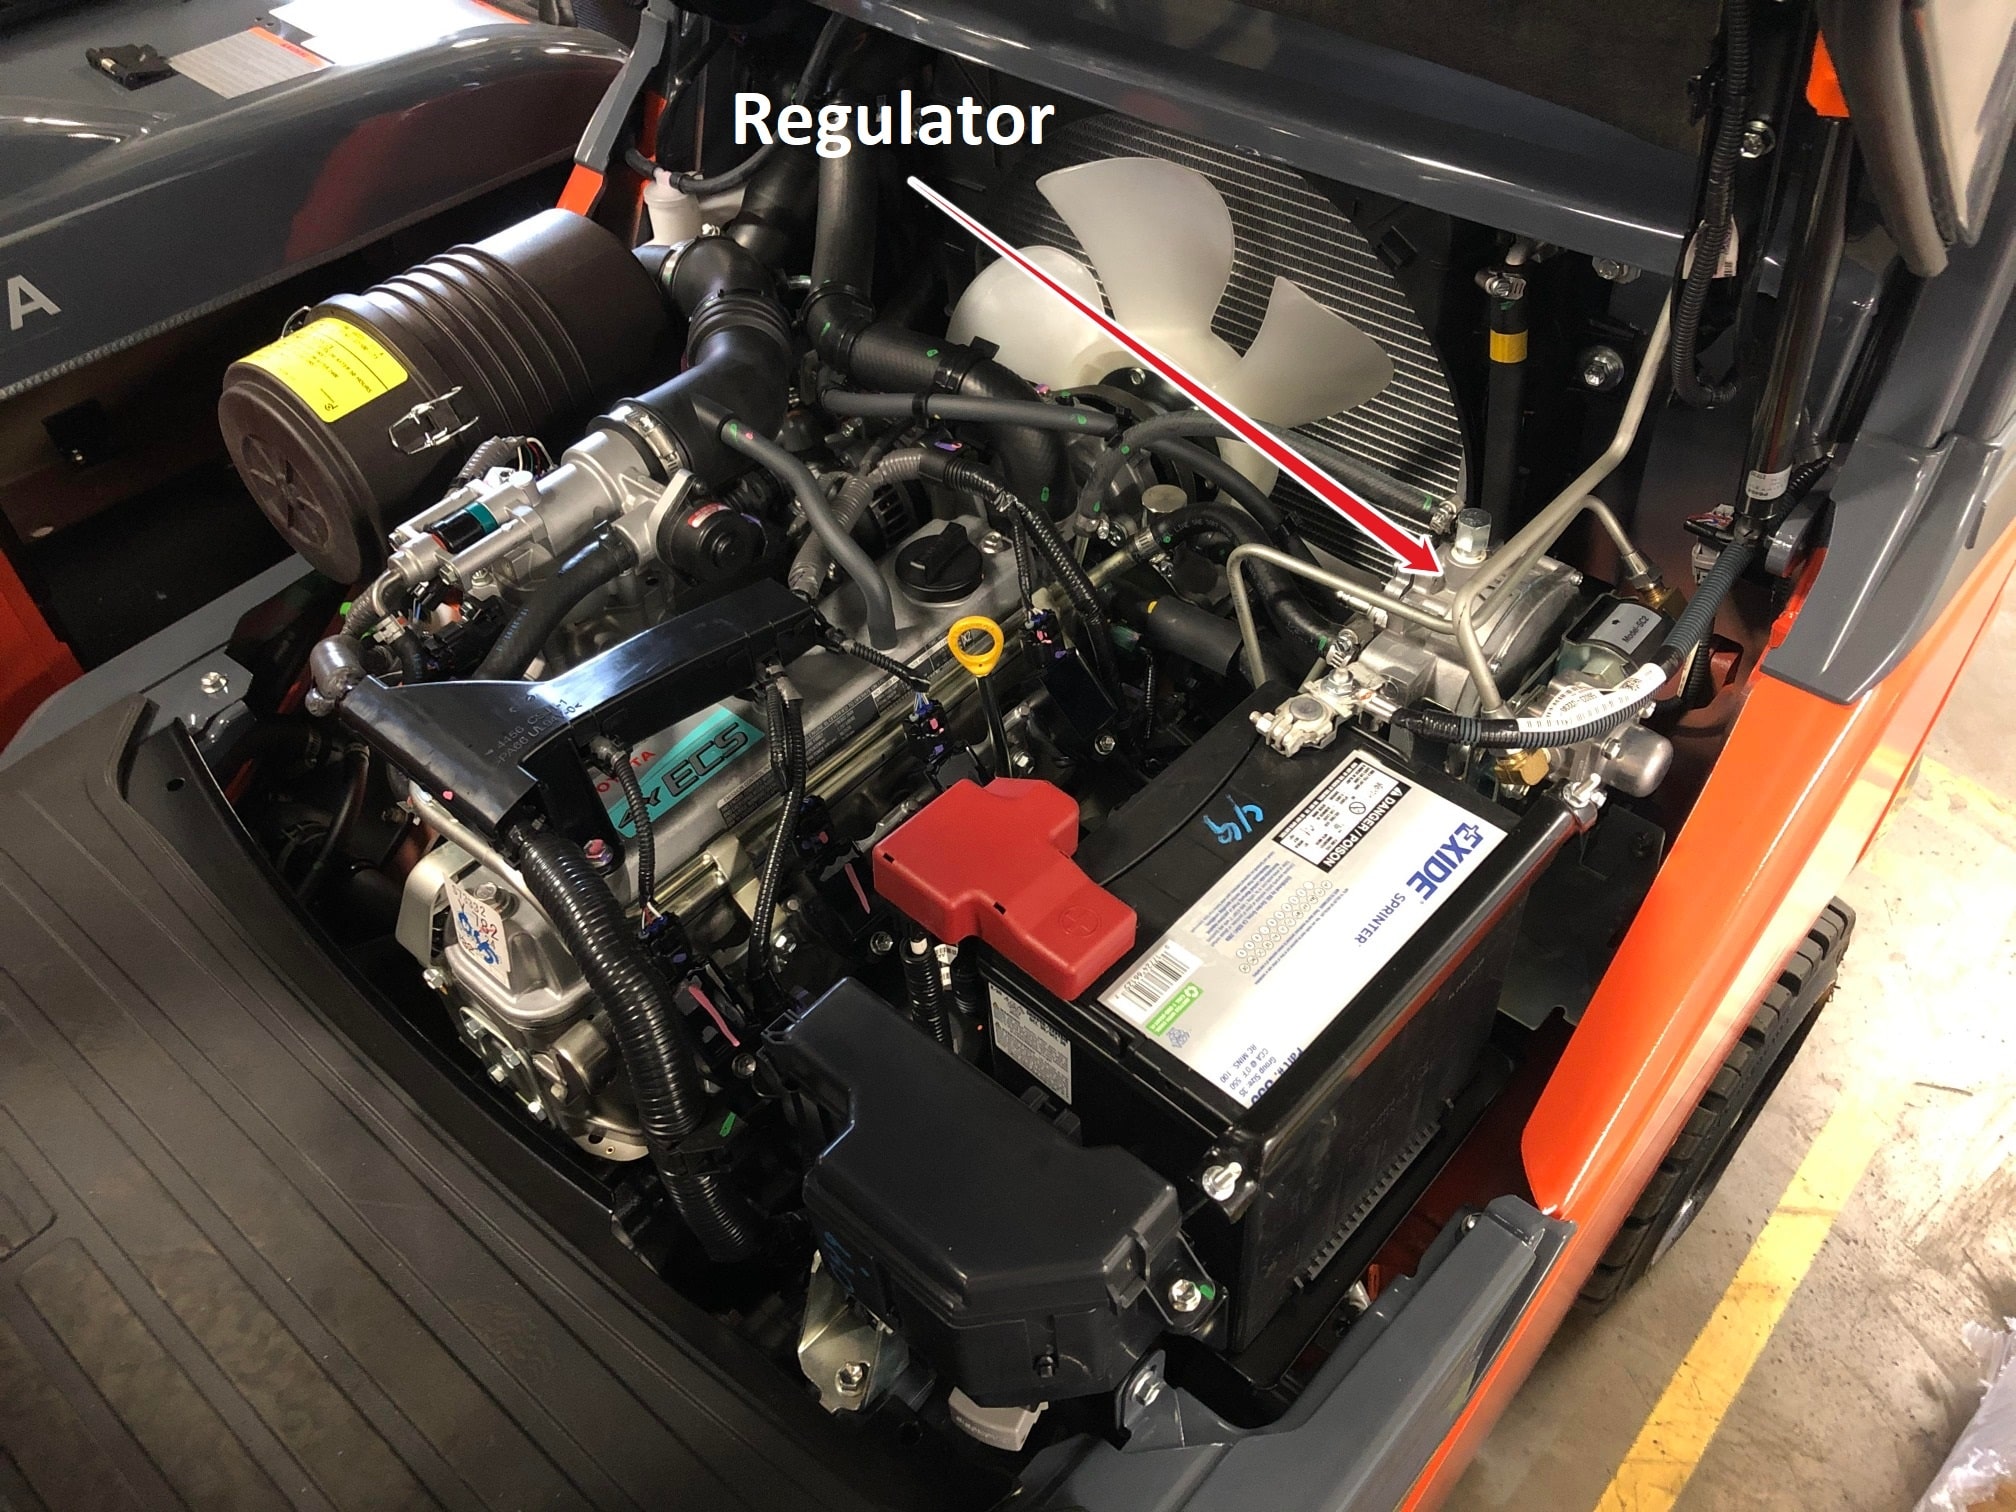 Location of the fuel regulator in a Toyota forklift